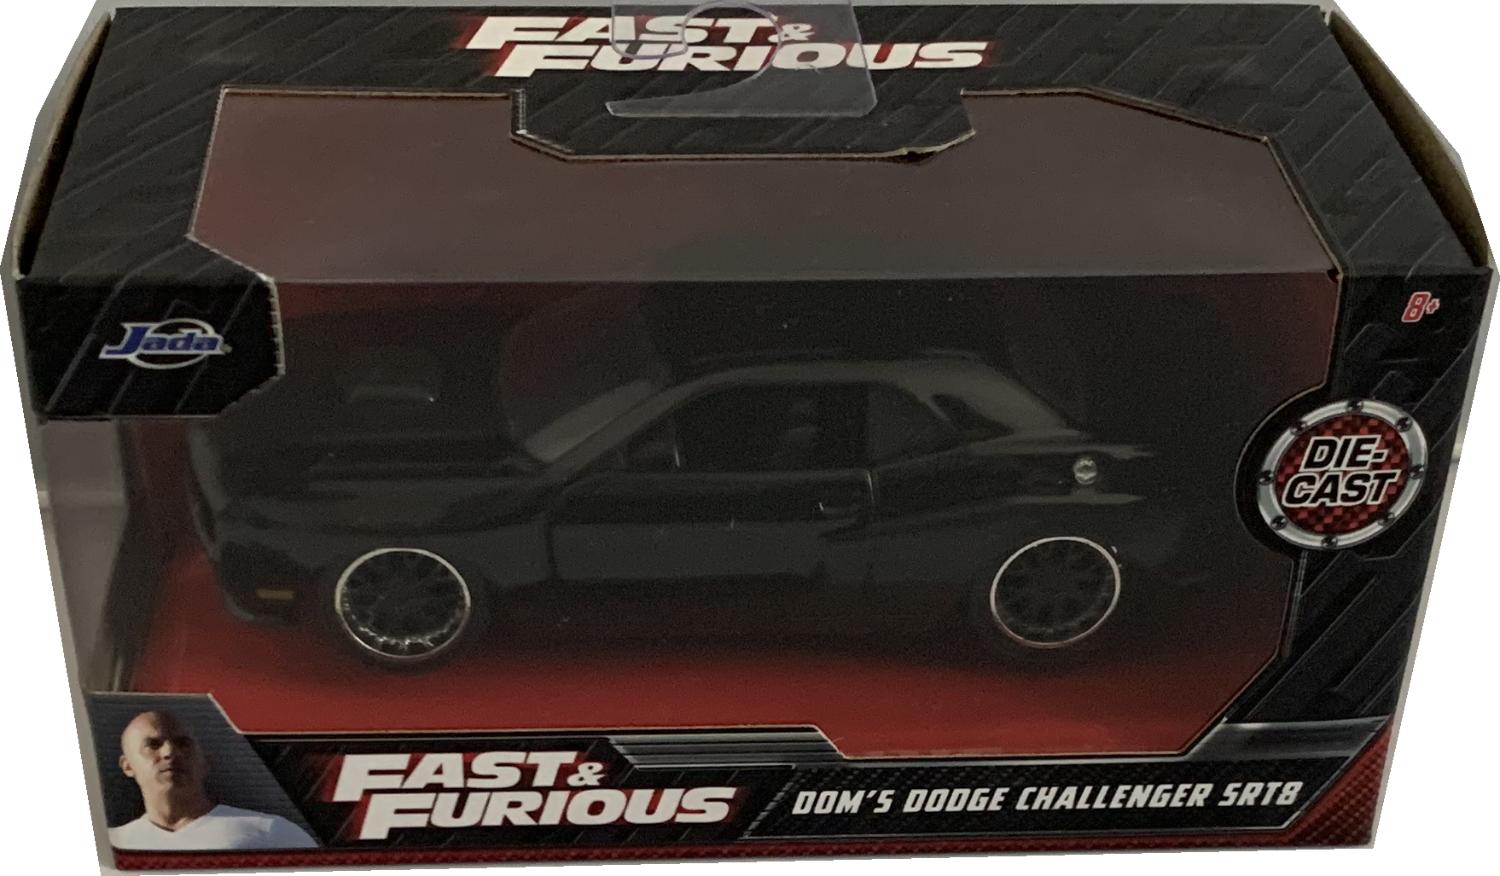 Fast and Furious 6 Dom’s Dodge Challenger SRT8 in black 1:32 scale model from Jada